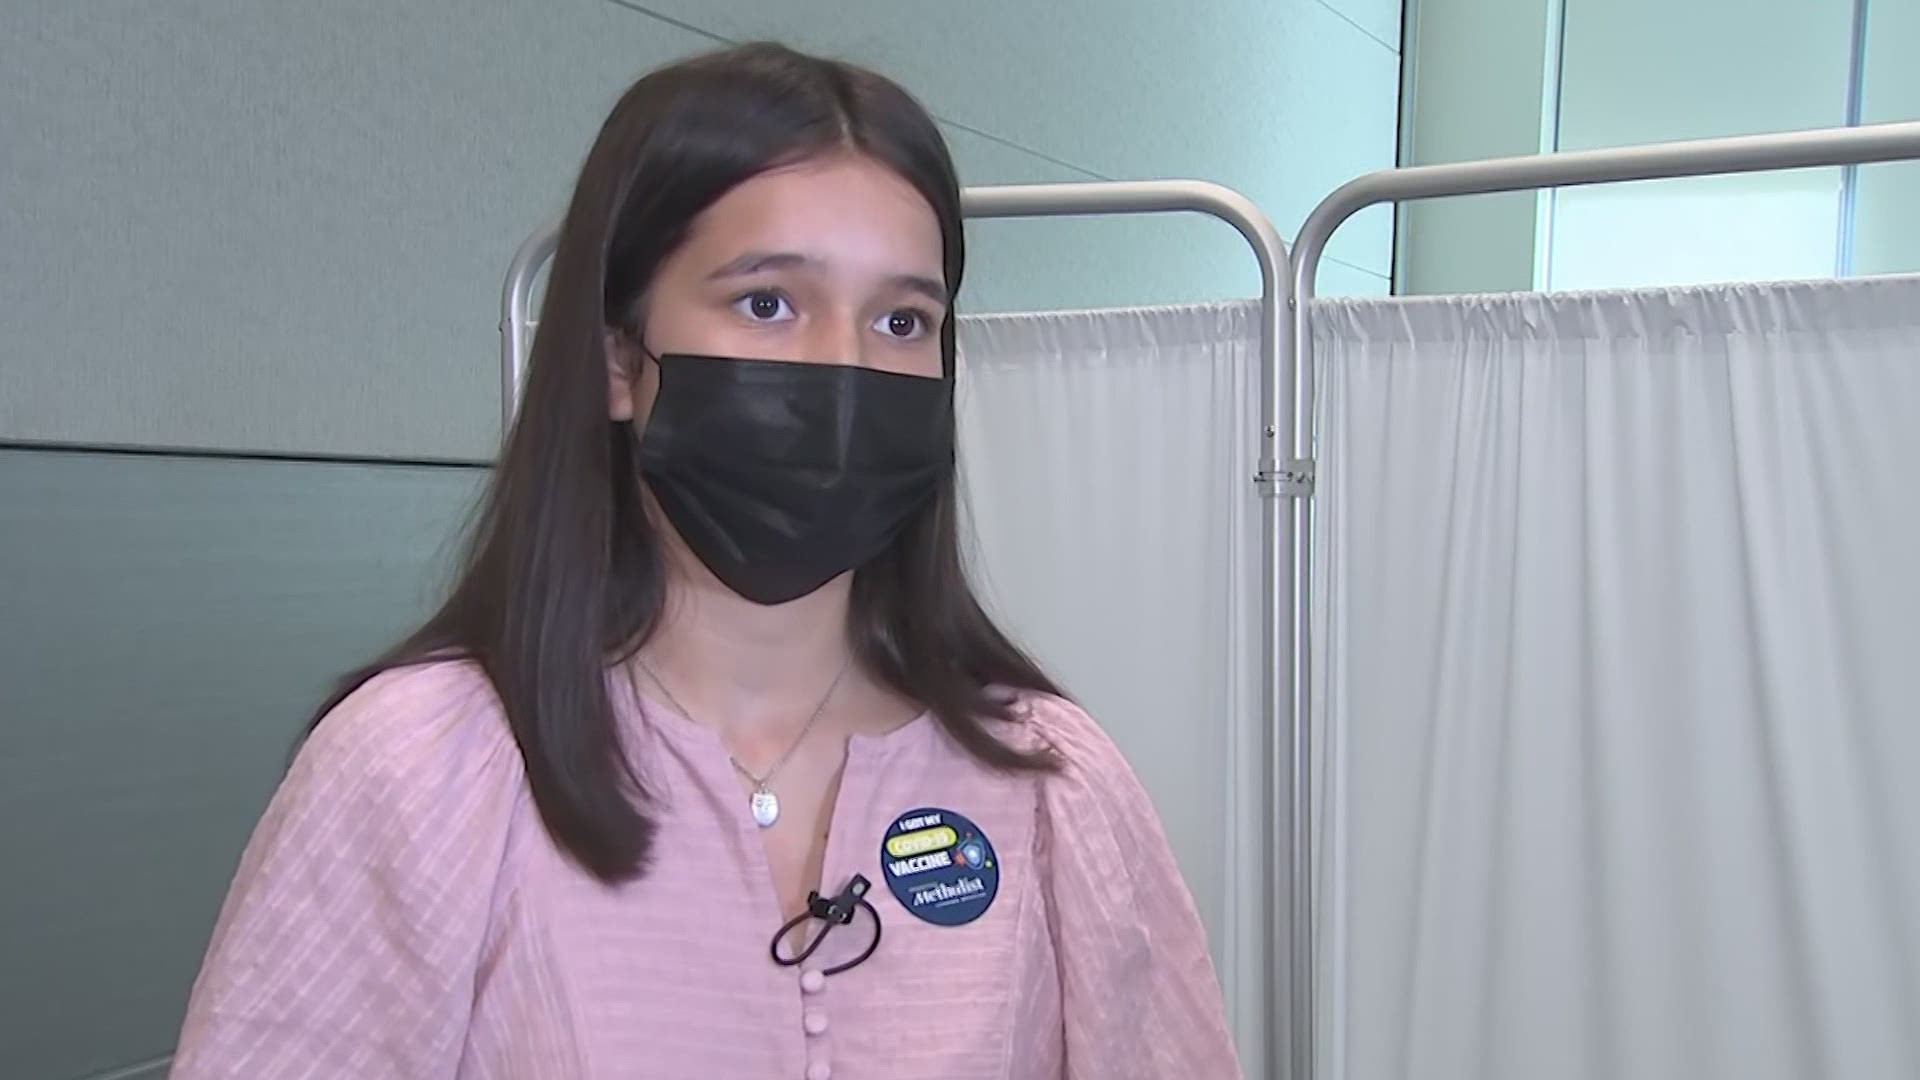 Teens are rolling up their sleeves to get their COVID-19 vaccine in the Houston area.